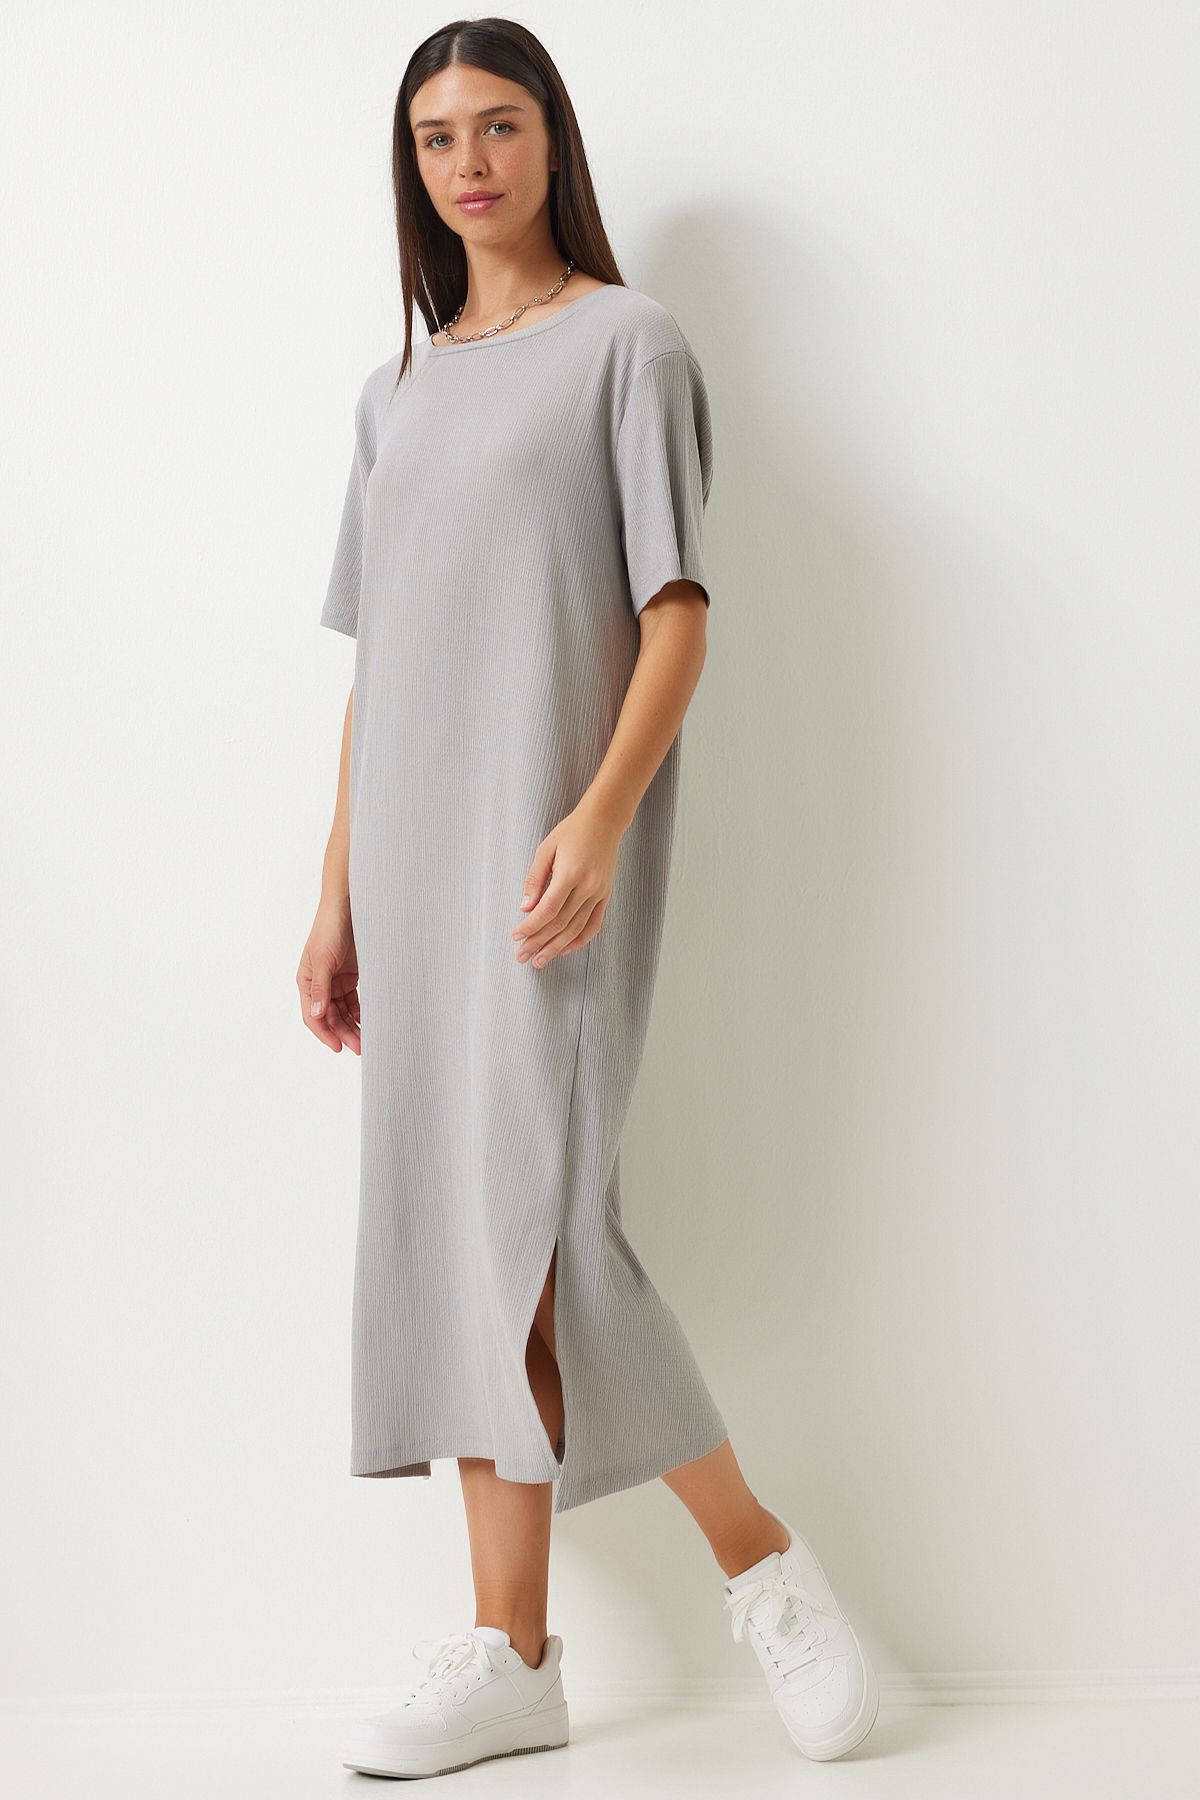 Happiness İstanbul Women's Gray Loose Long Daily Summer Knitted Dress